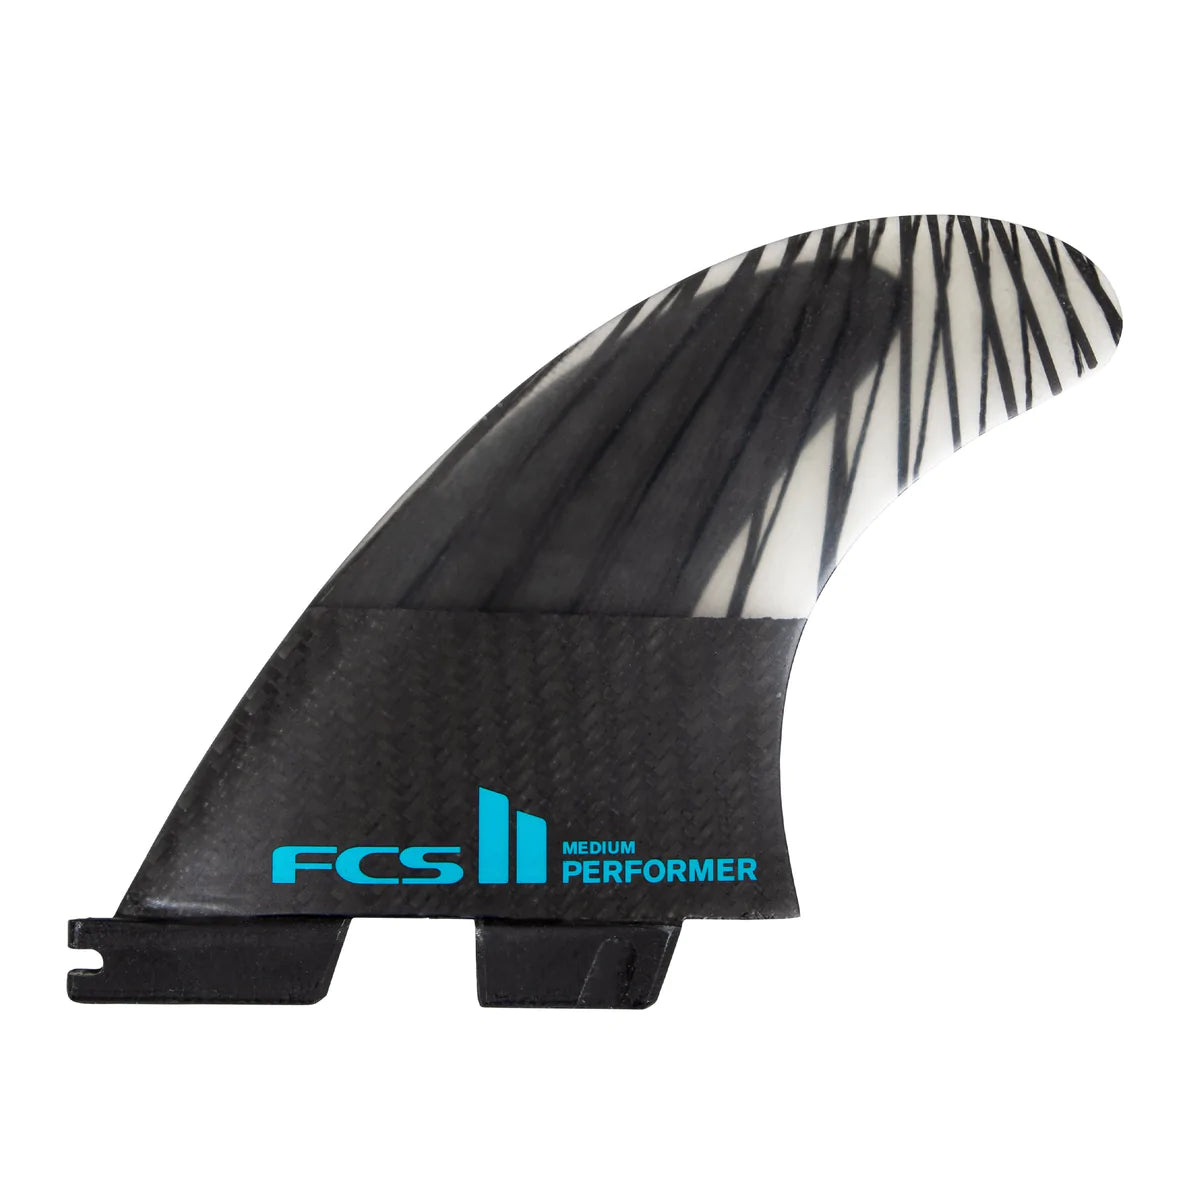 FCS II Performer PC Carbon Thruster